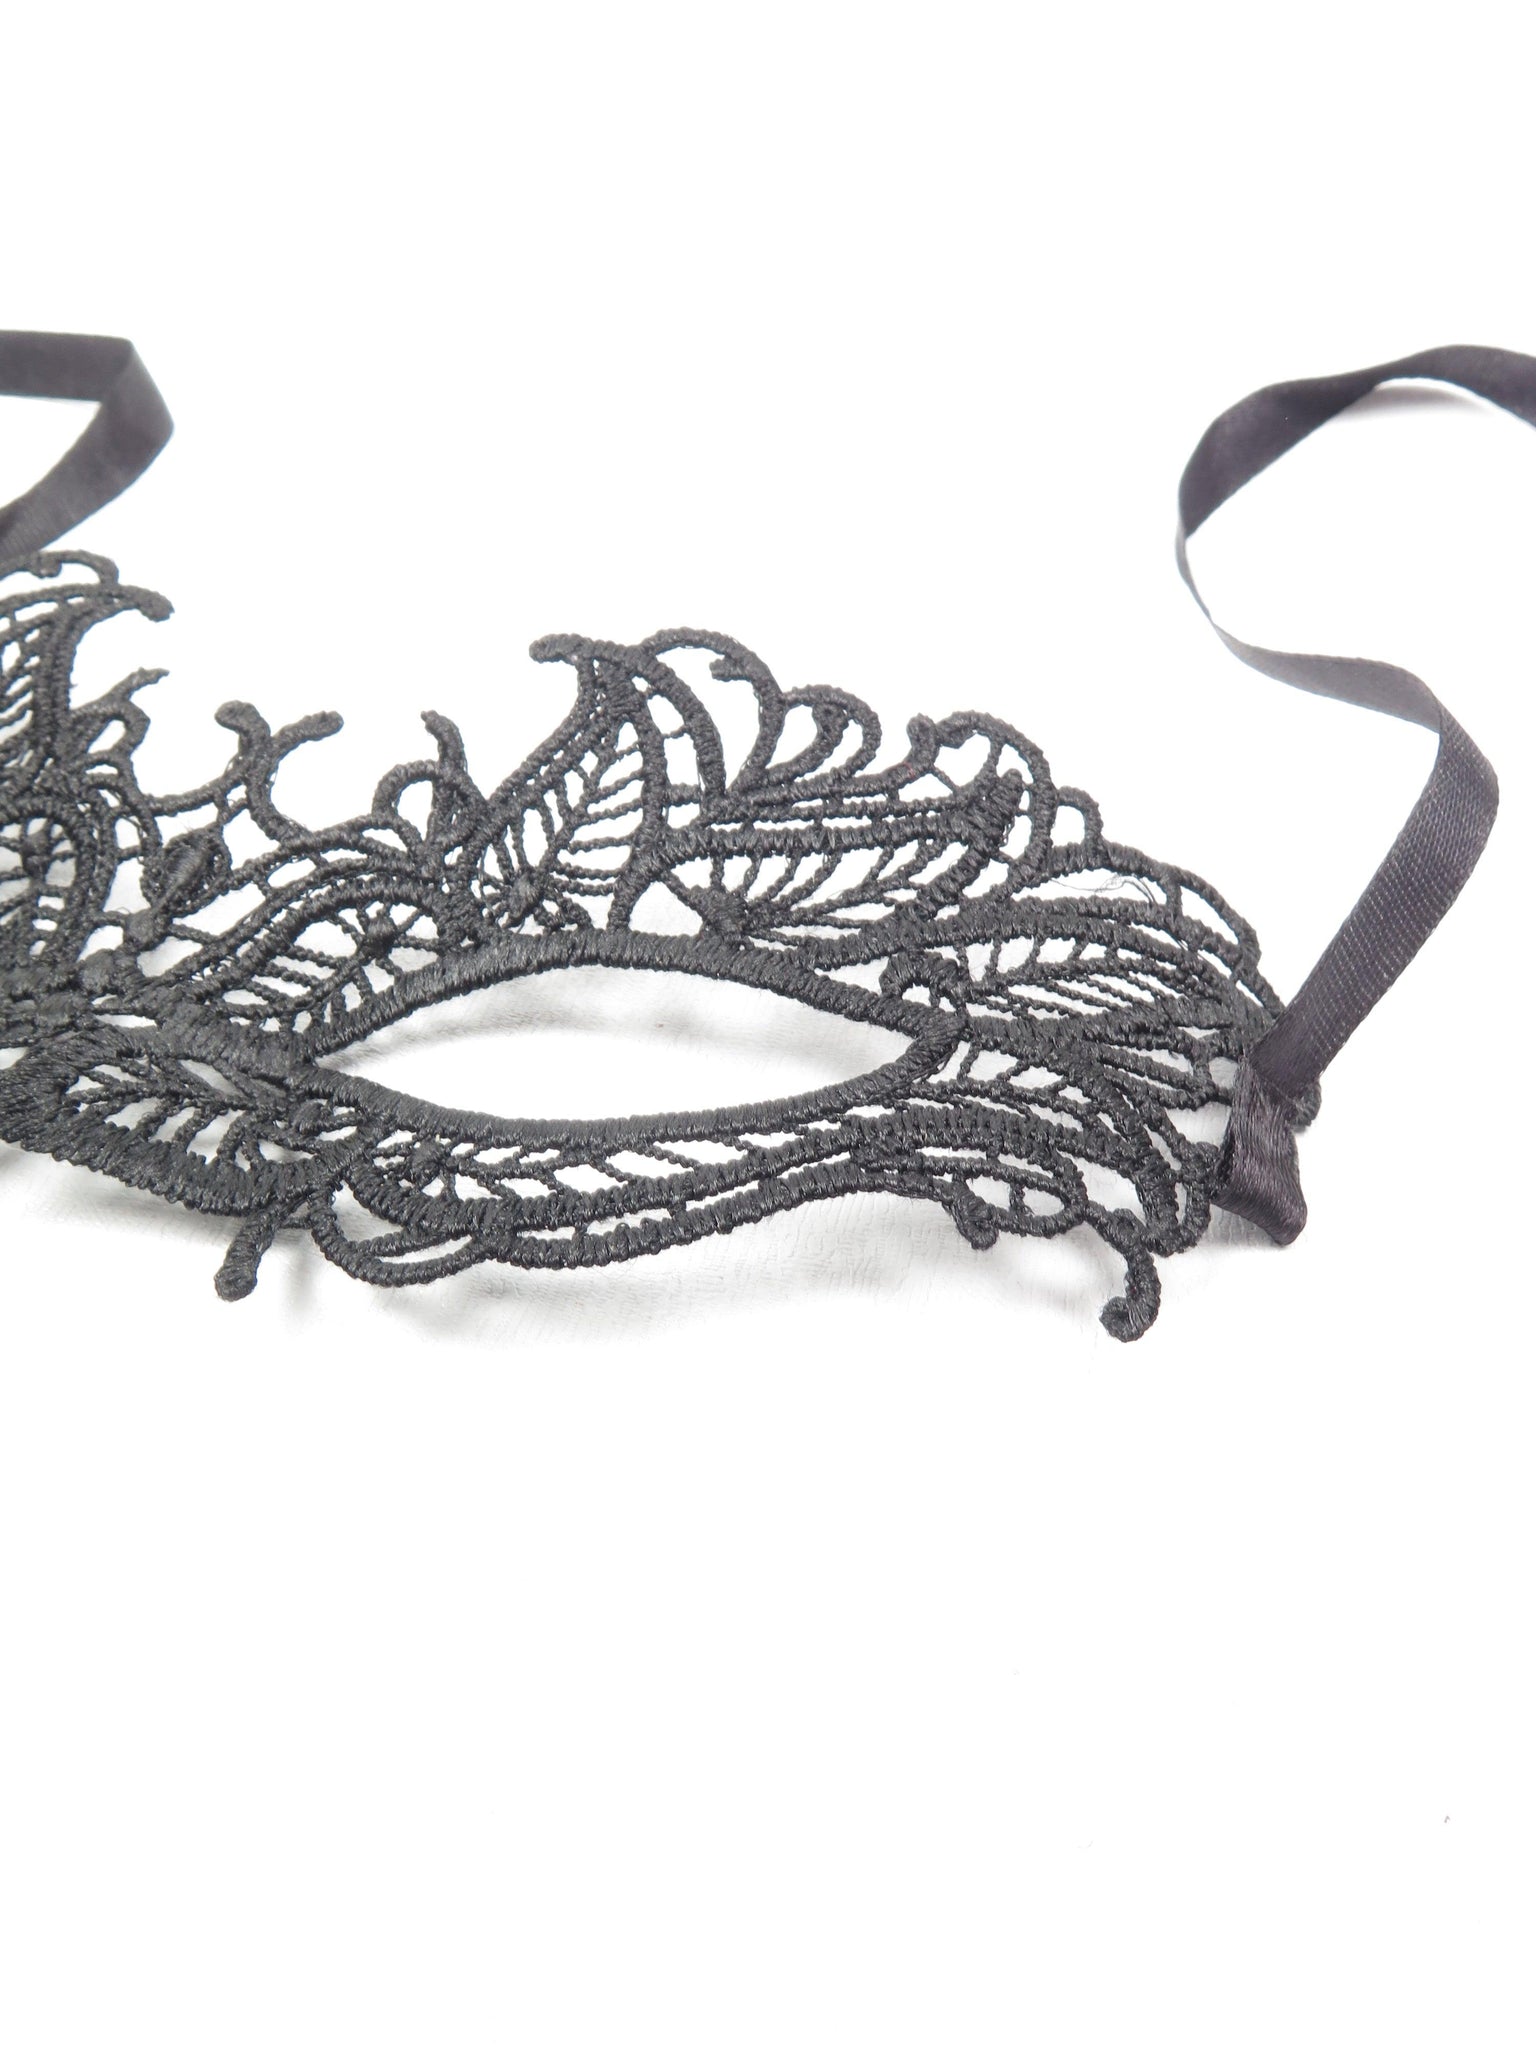 New Black Lace Mask - The Harlequin